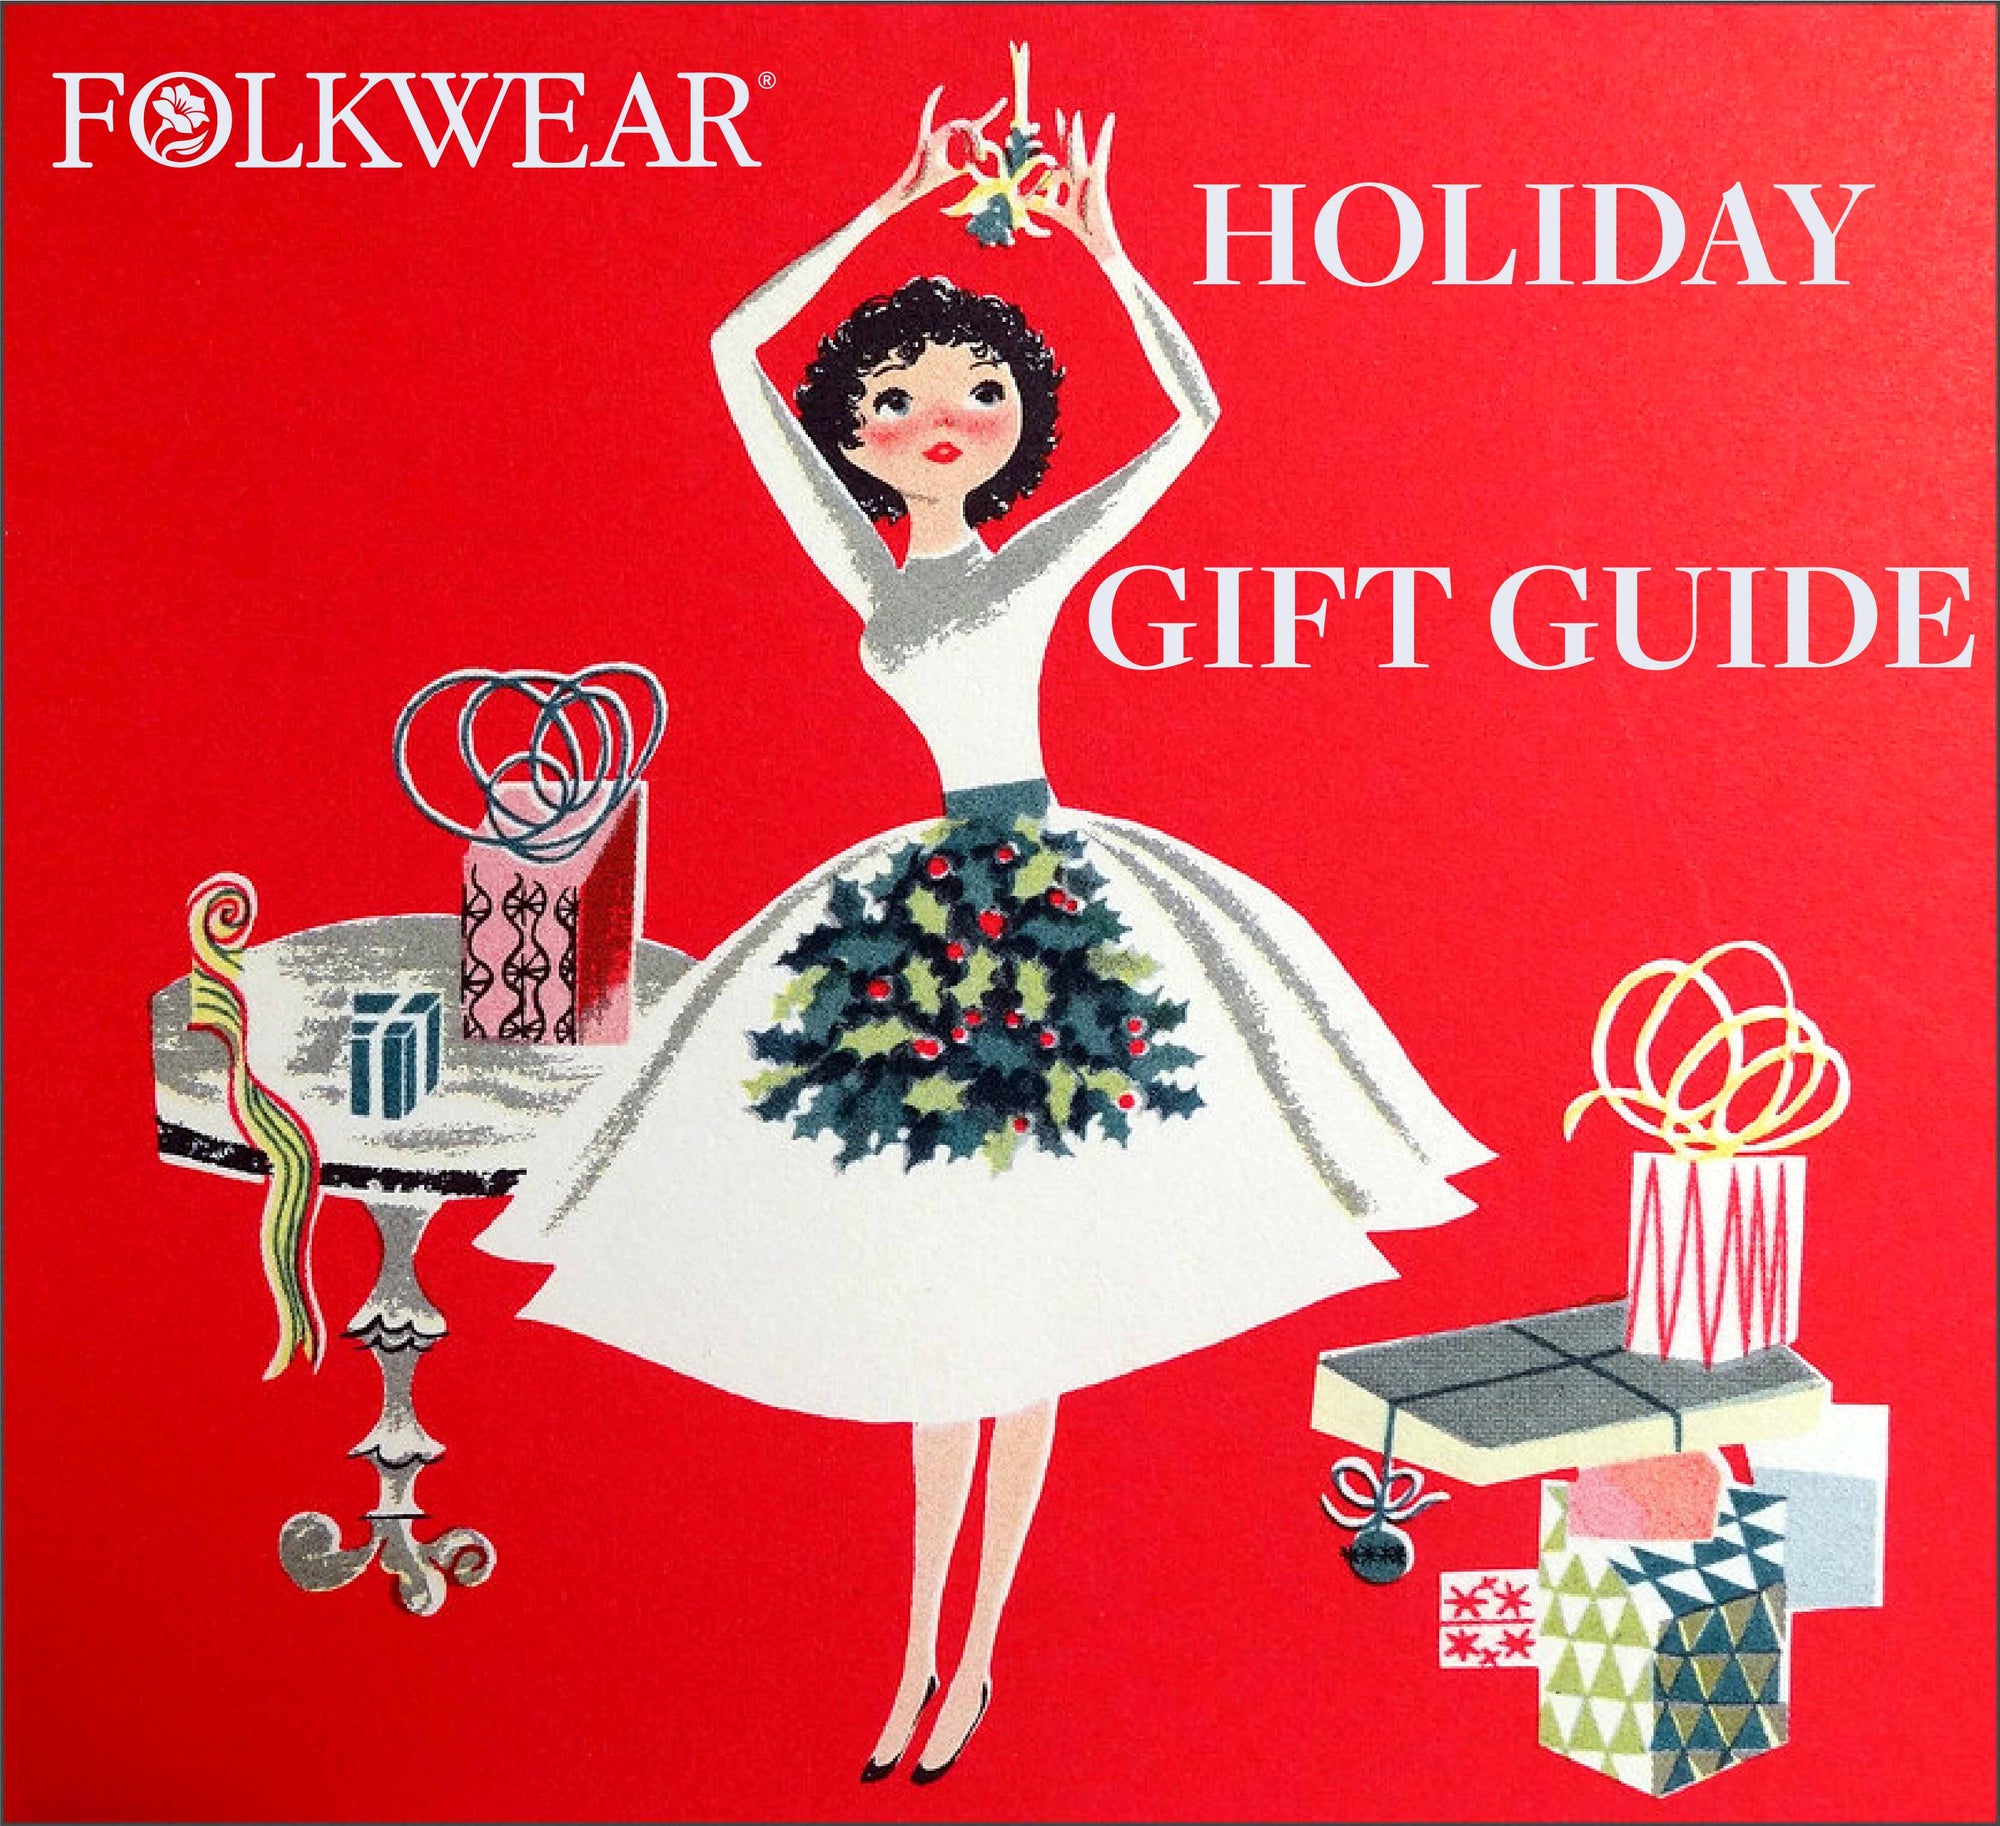 Folkwear's 2021 Holiday Gift Guide